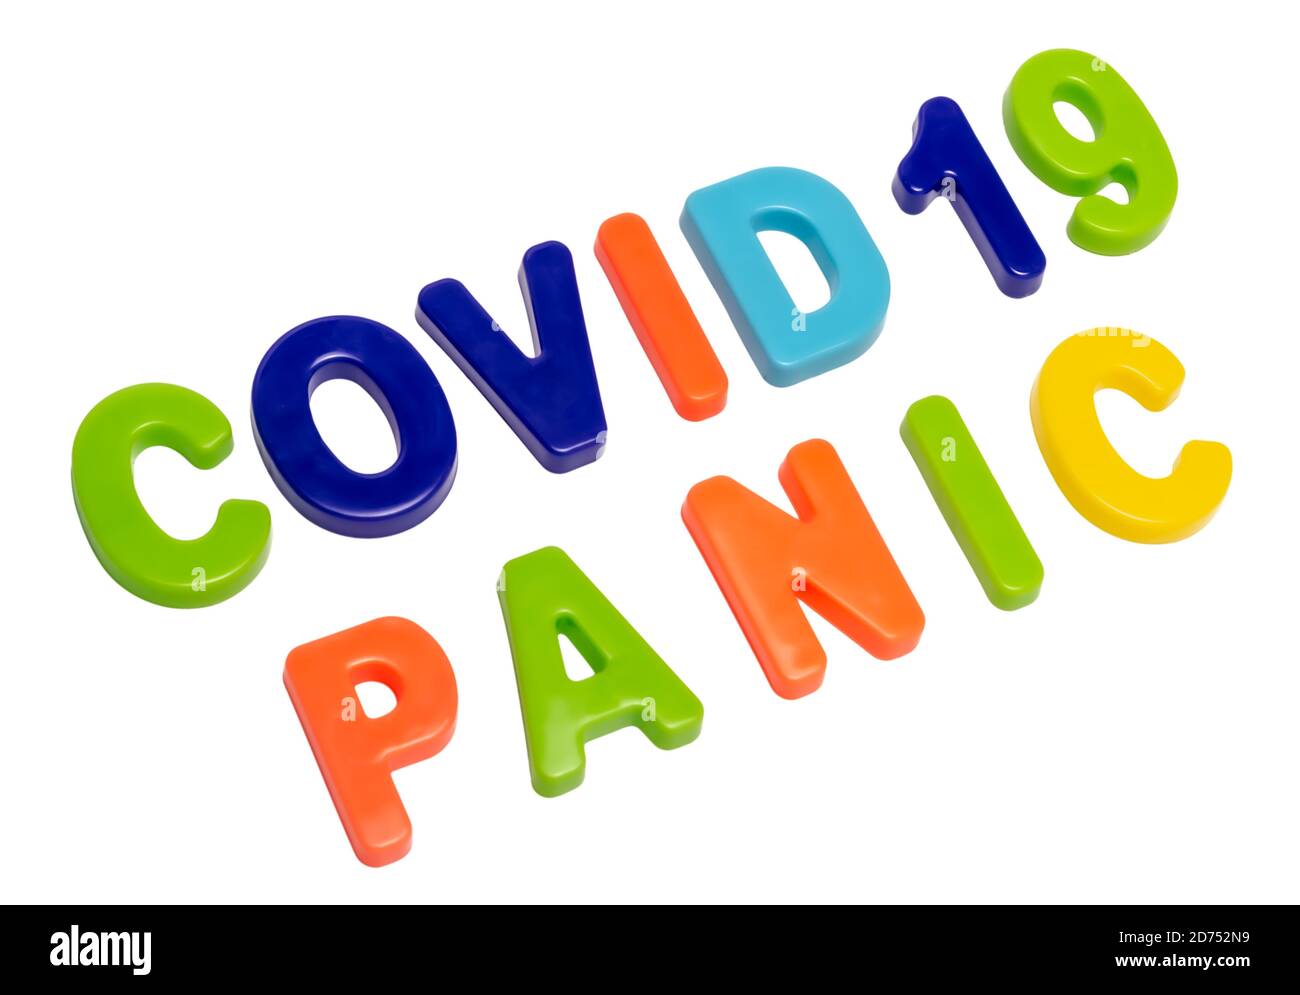 Coronavirus pandemic, text COVID-19 PANIC on a white background. Panic of a global pandemic. COVID-19 is the official new name for coronavirus disease Stock Photo